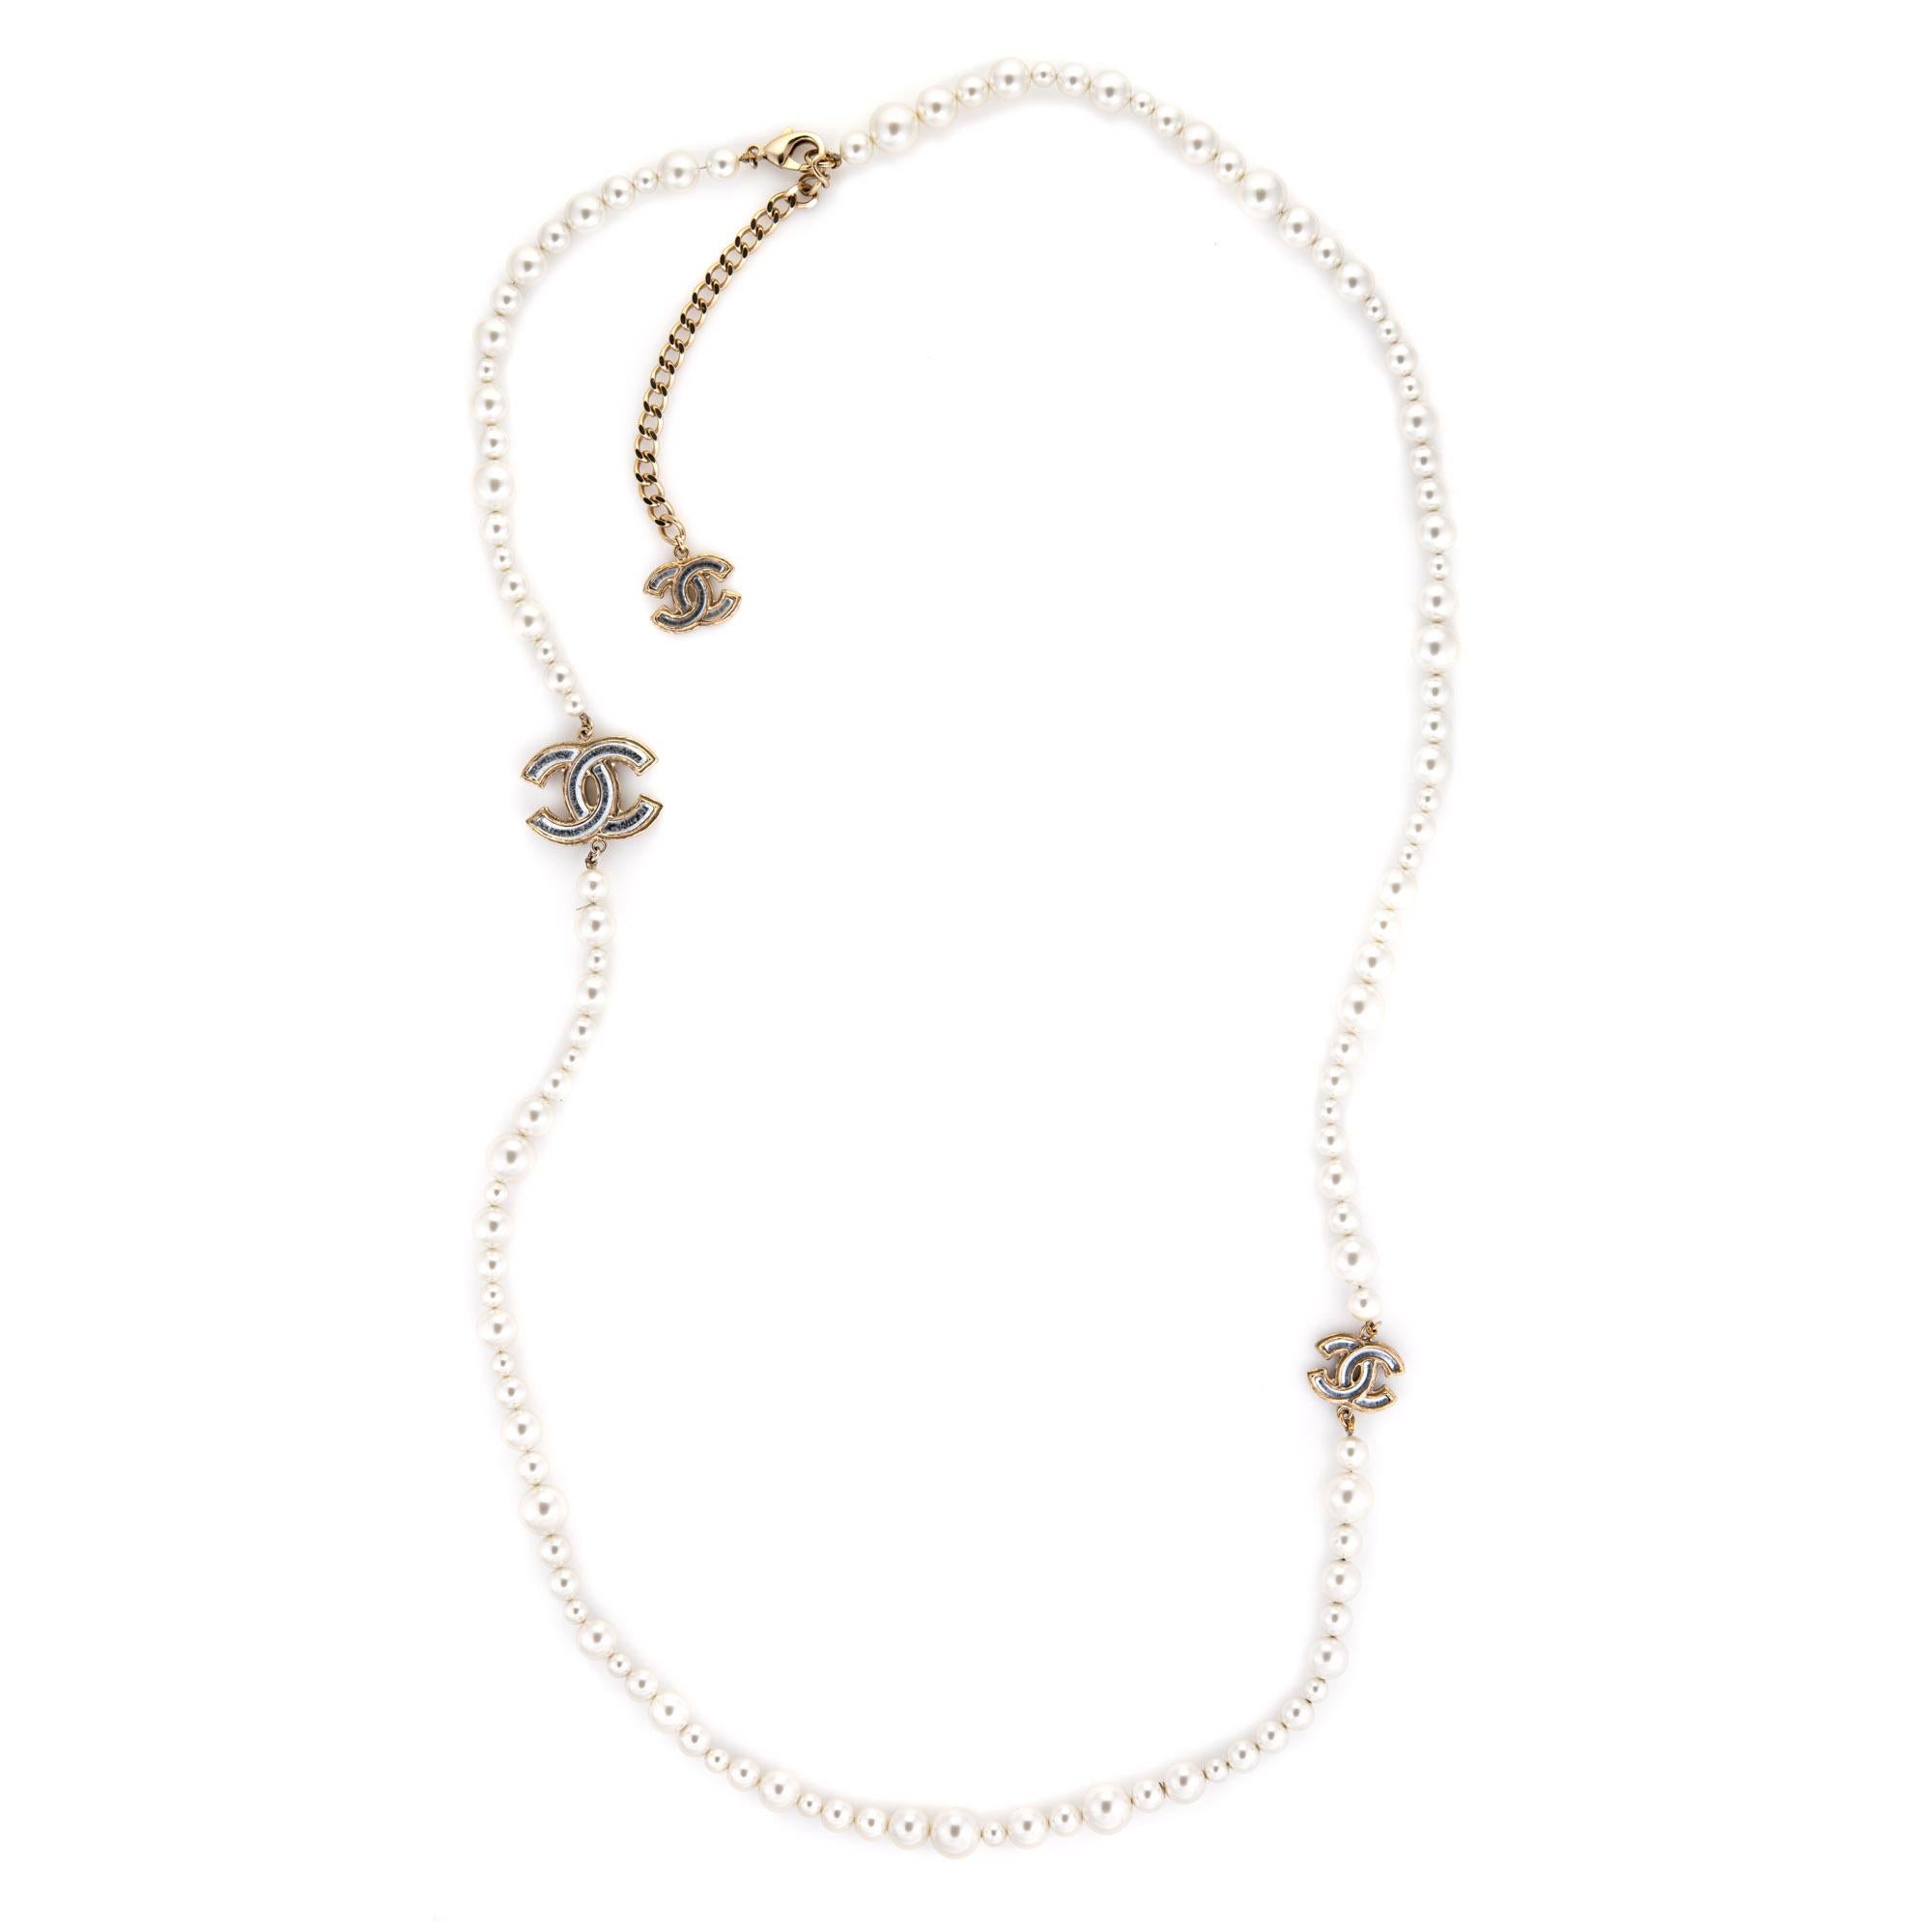 Pre-owned Chanel graduated faux pearl necklace (or belt) crafted in silver tone (circa 2012). 

The necklace features graduated 6mm to 12mm faux white pearls. Two CC logos separate the beads. The necklace can be worn as a long 48 inch chain or